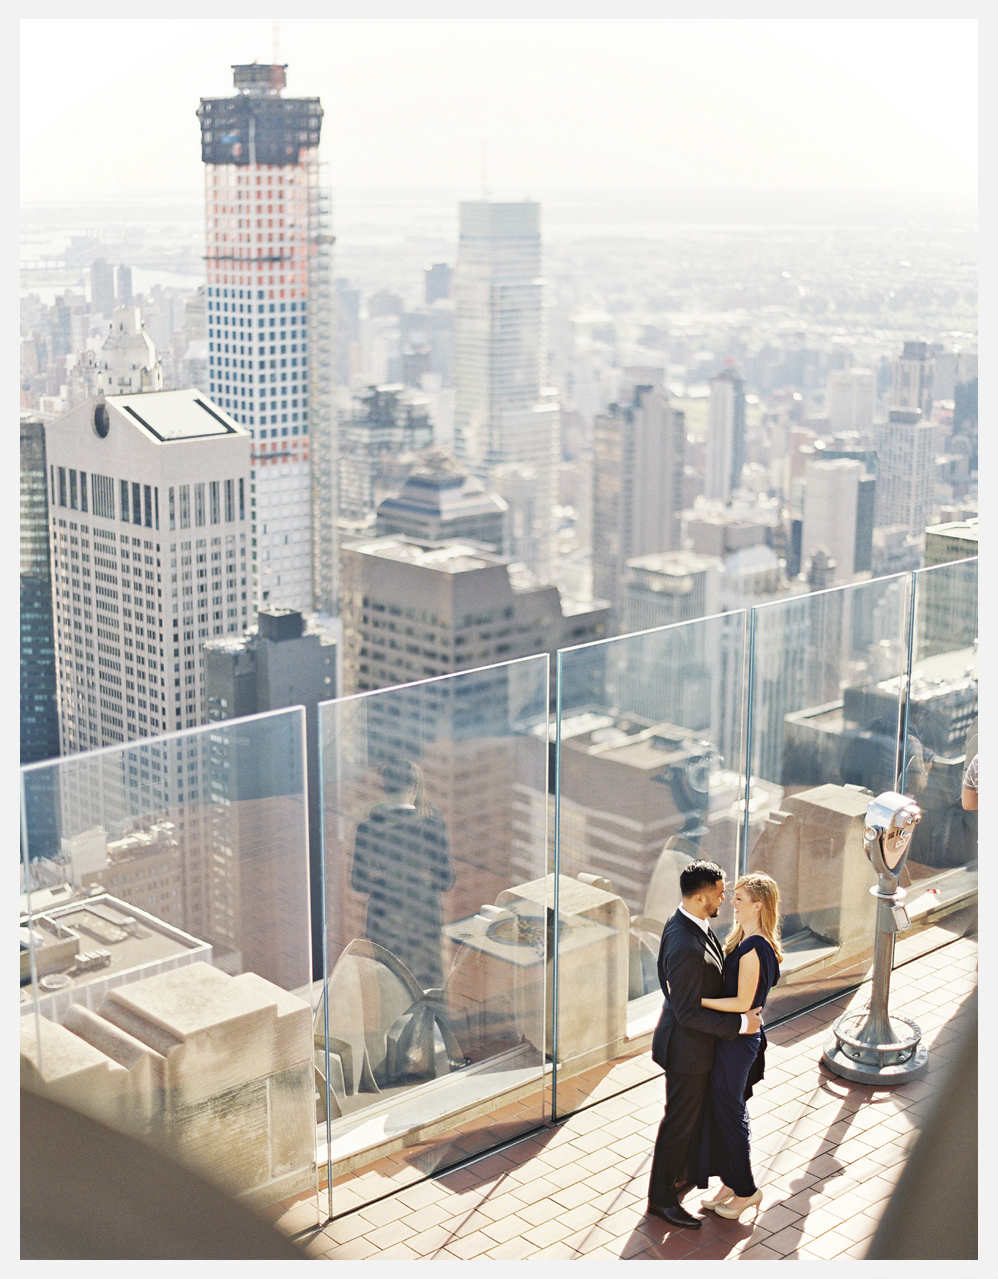 Engagement photos from Top of the Rock in New York by Alicia Swedenborg, wedding photographer